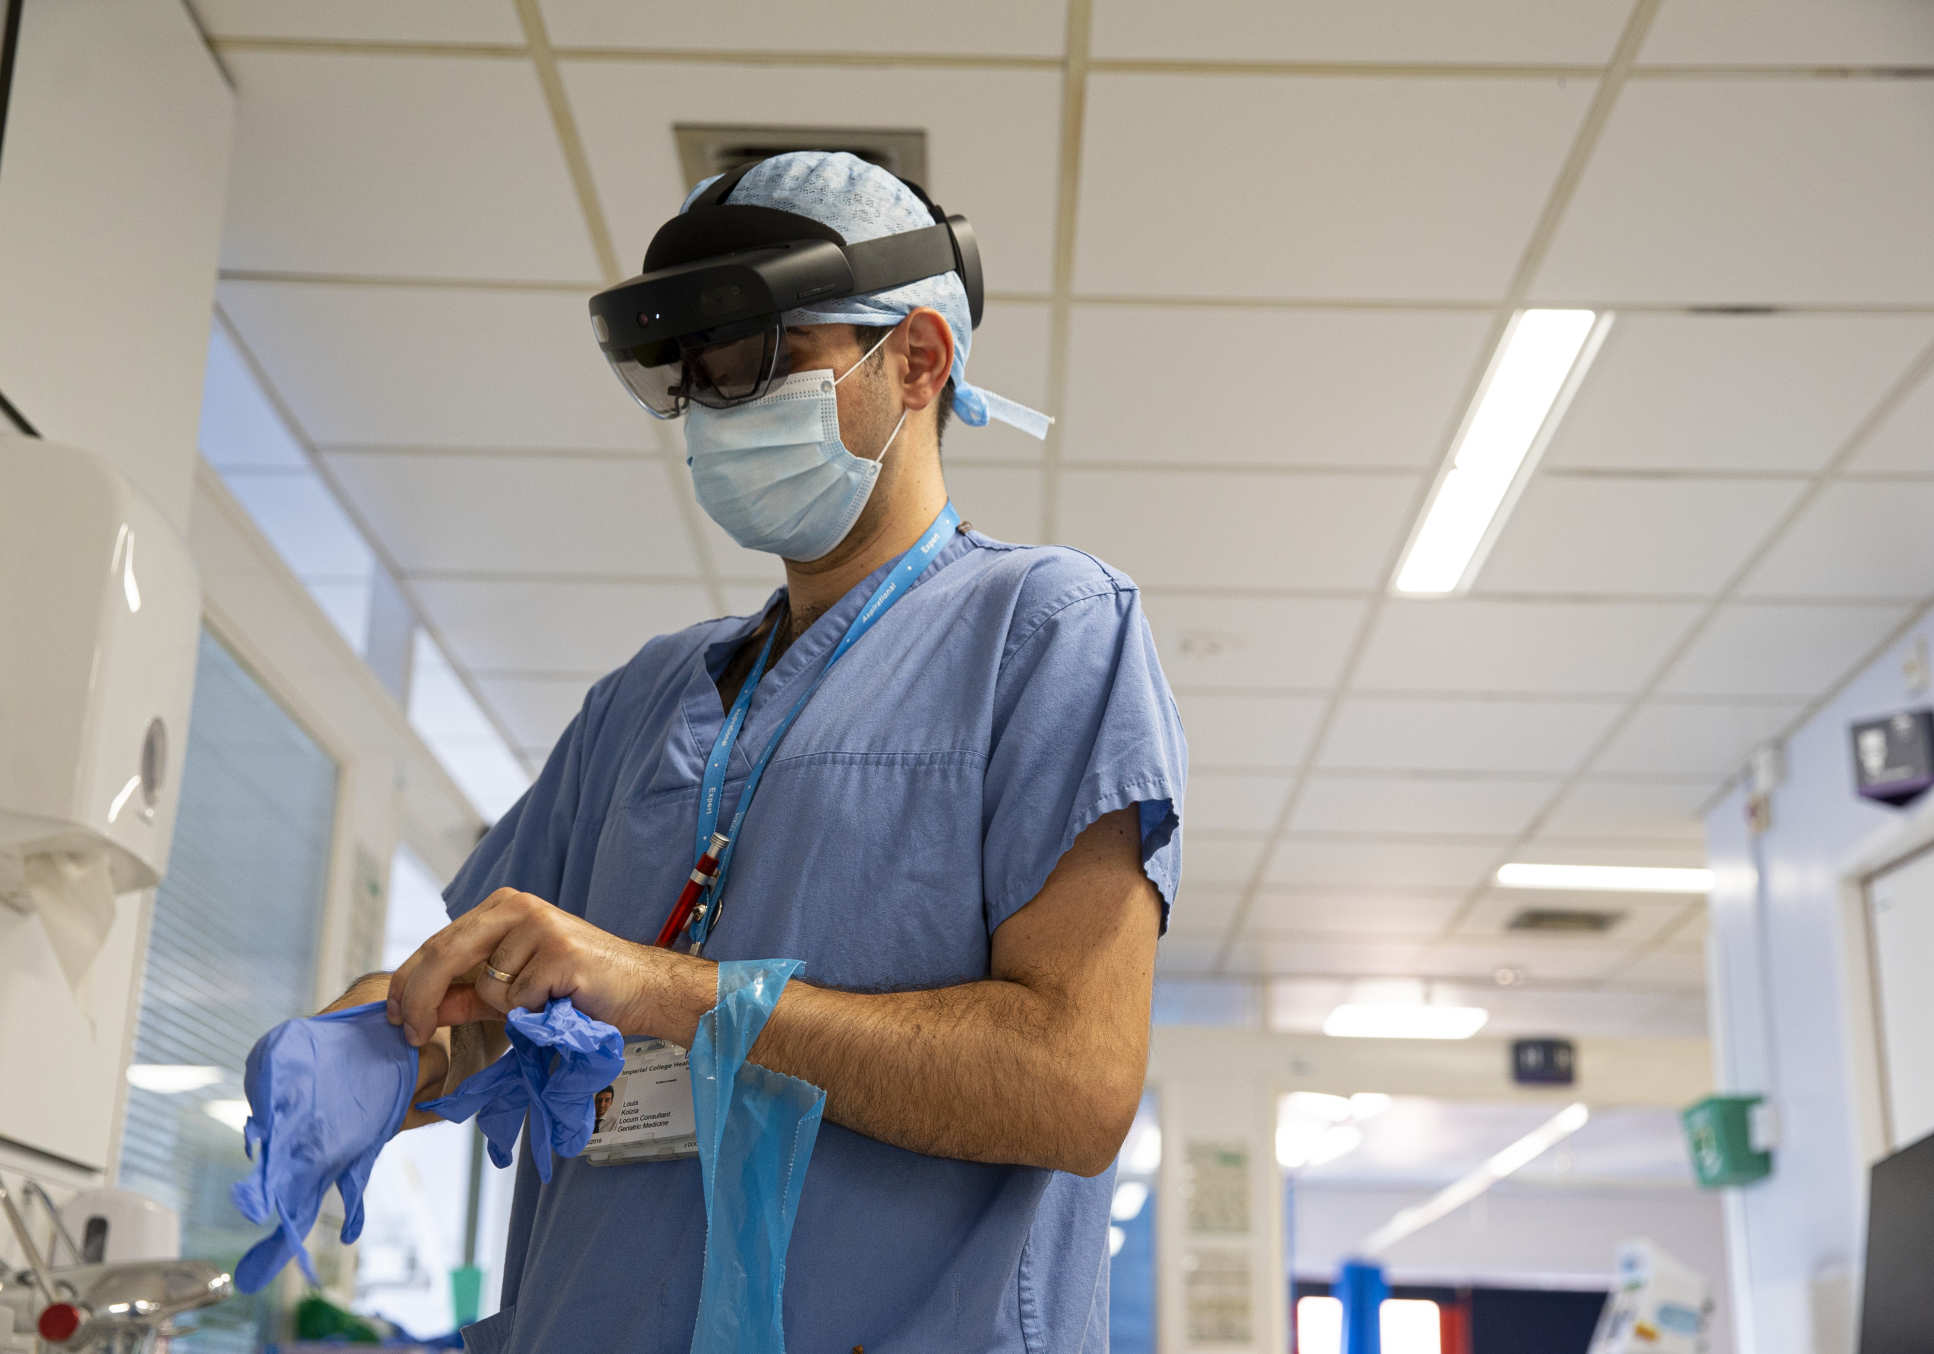 A doctor wearing HoloLens